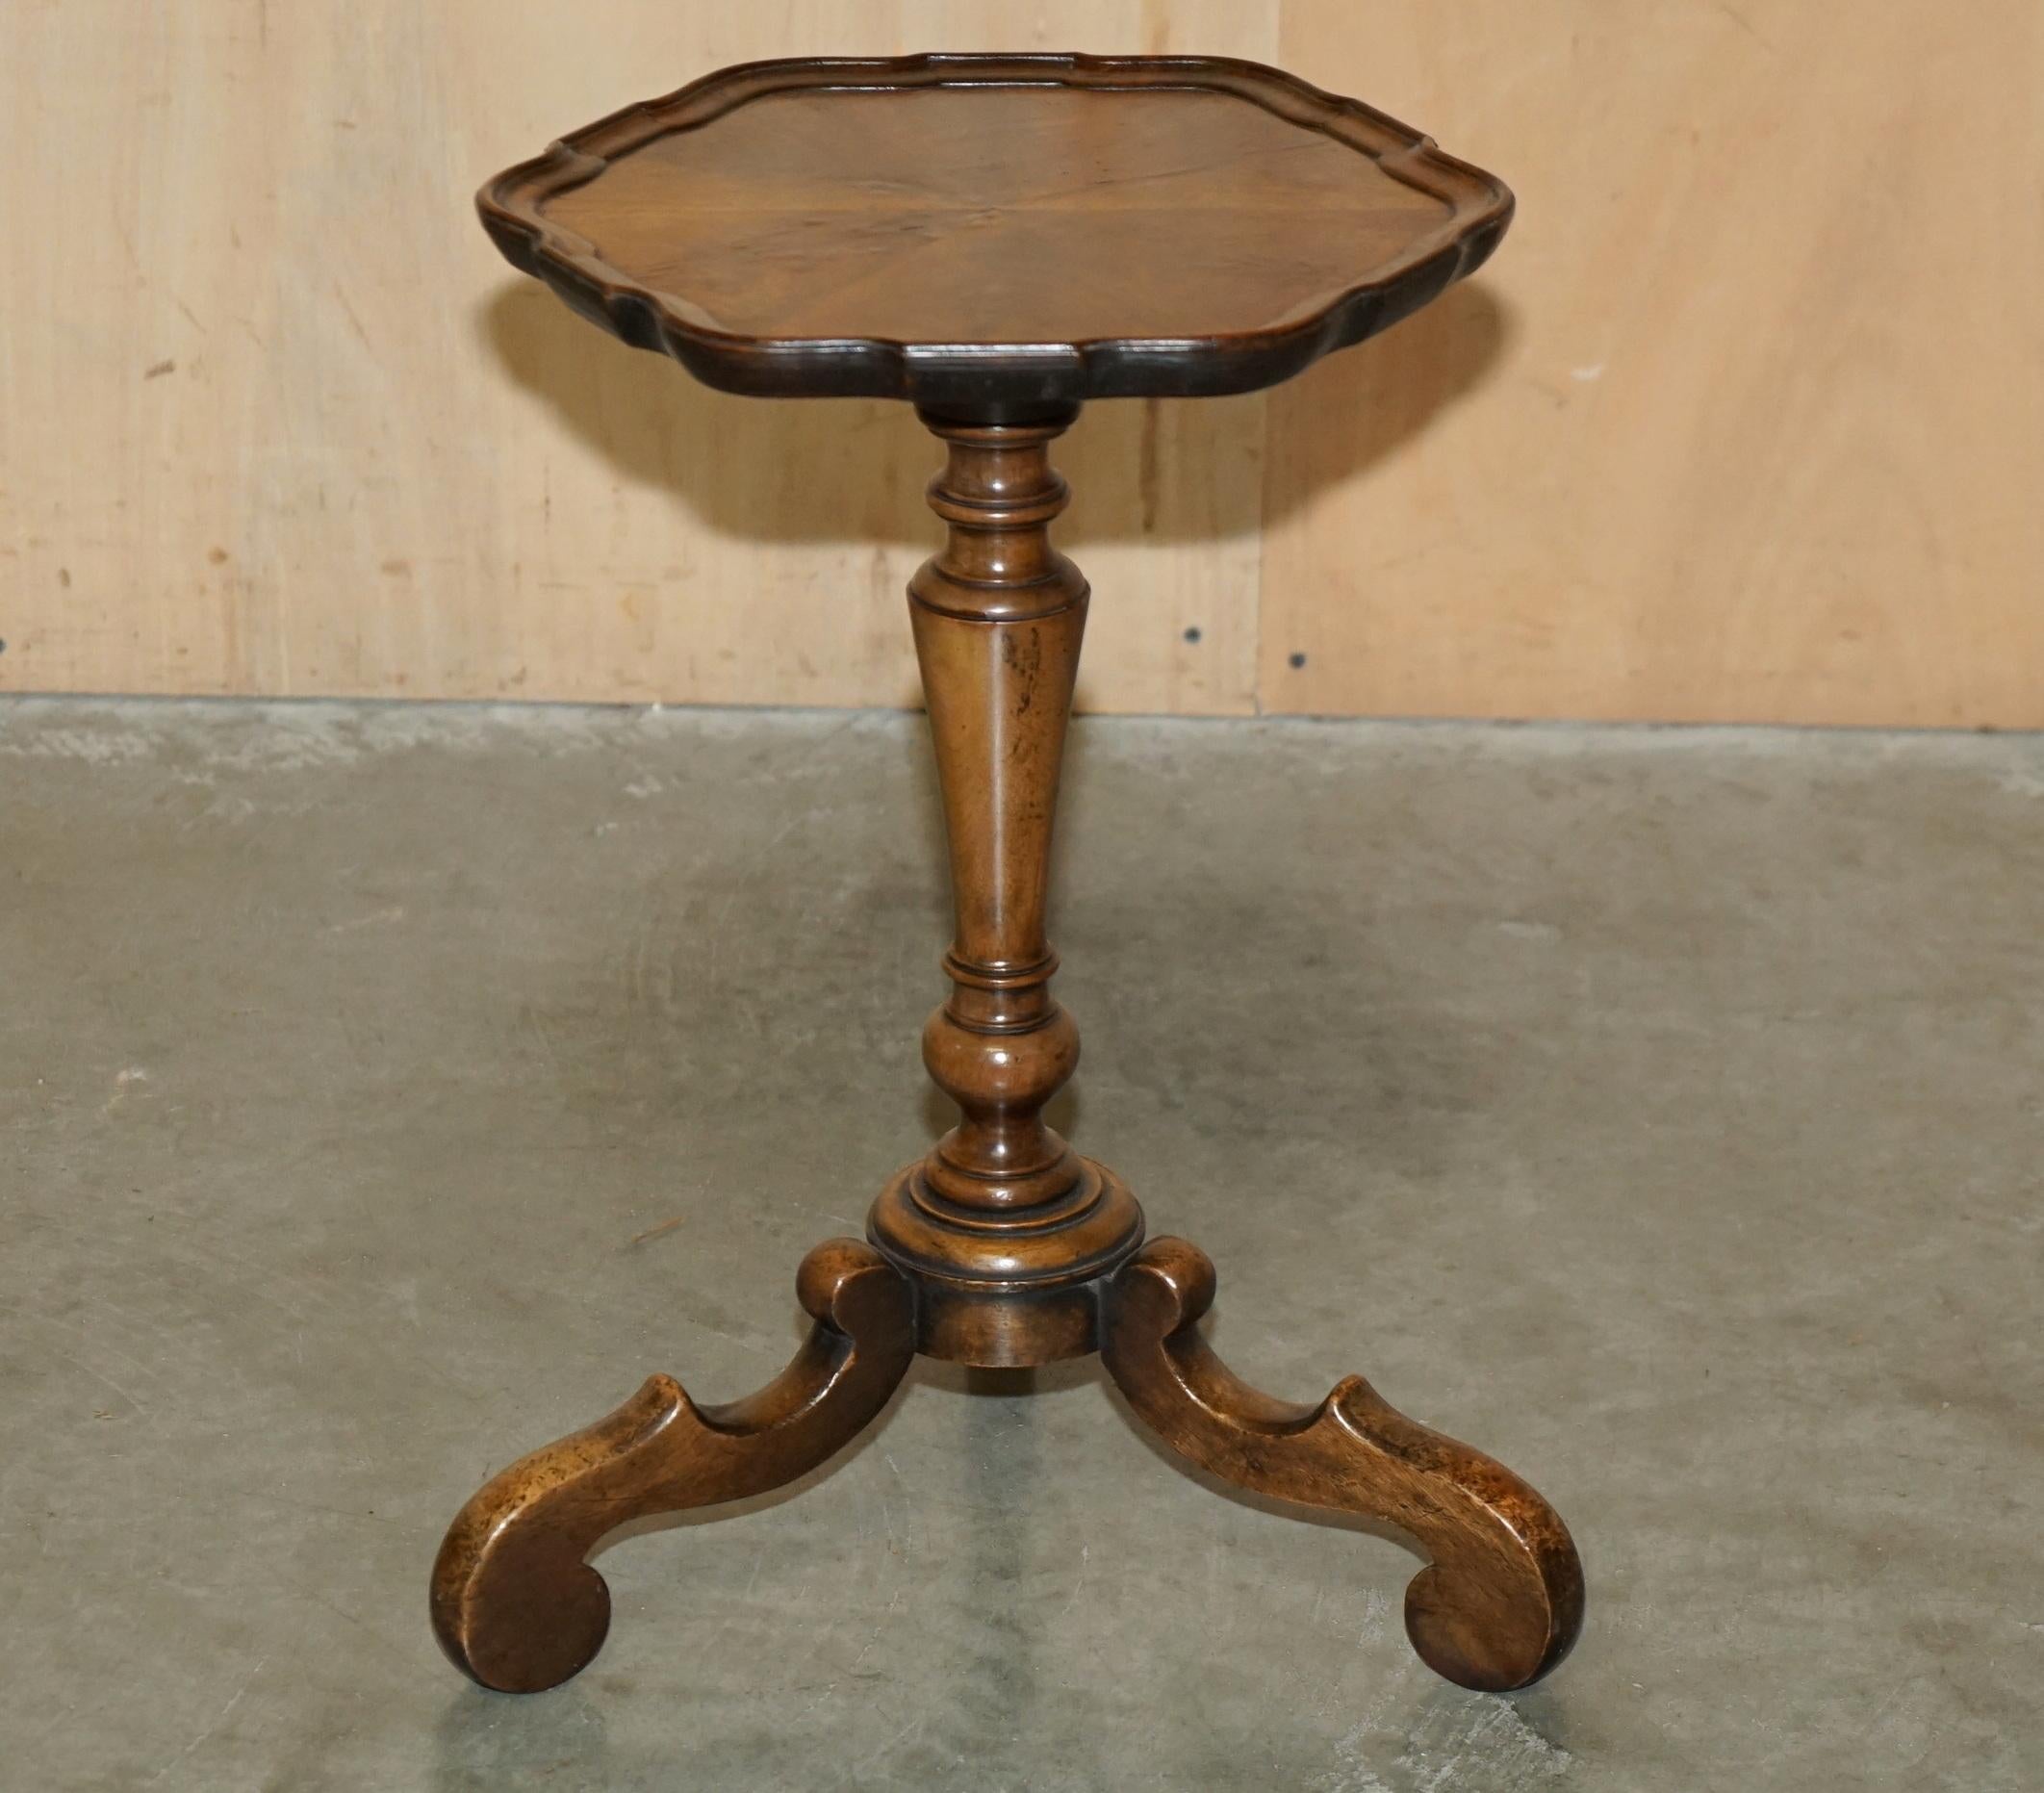 Victorian FULLY RESTORED ANTIQUE CHARLES TOZER OYSTER HARDWOOD TRIPOD SiDE END LAMP TABLE For Sale